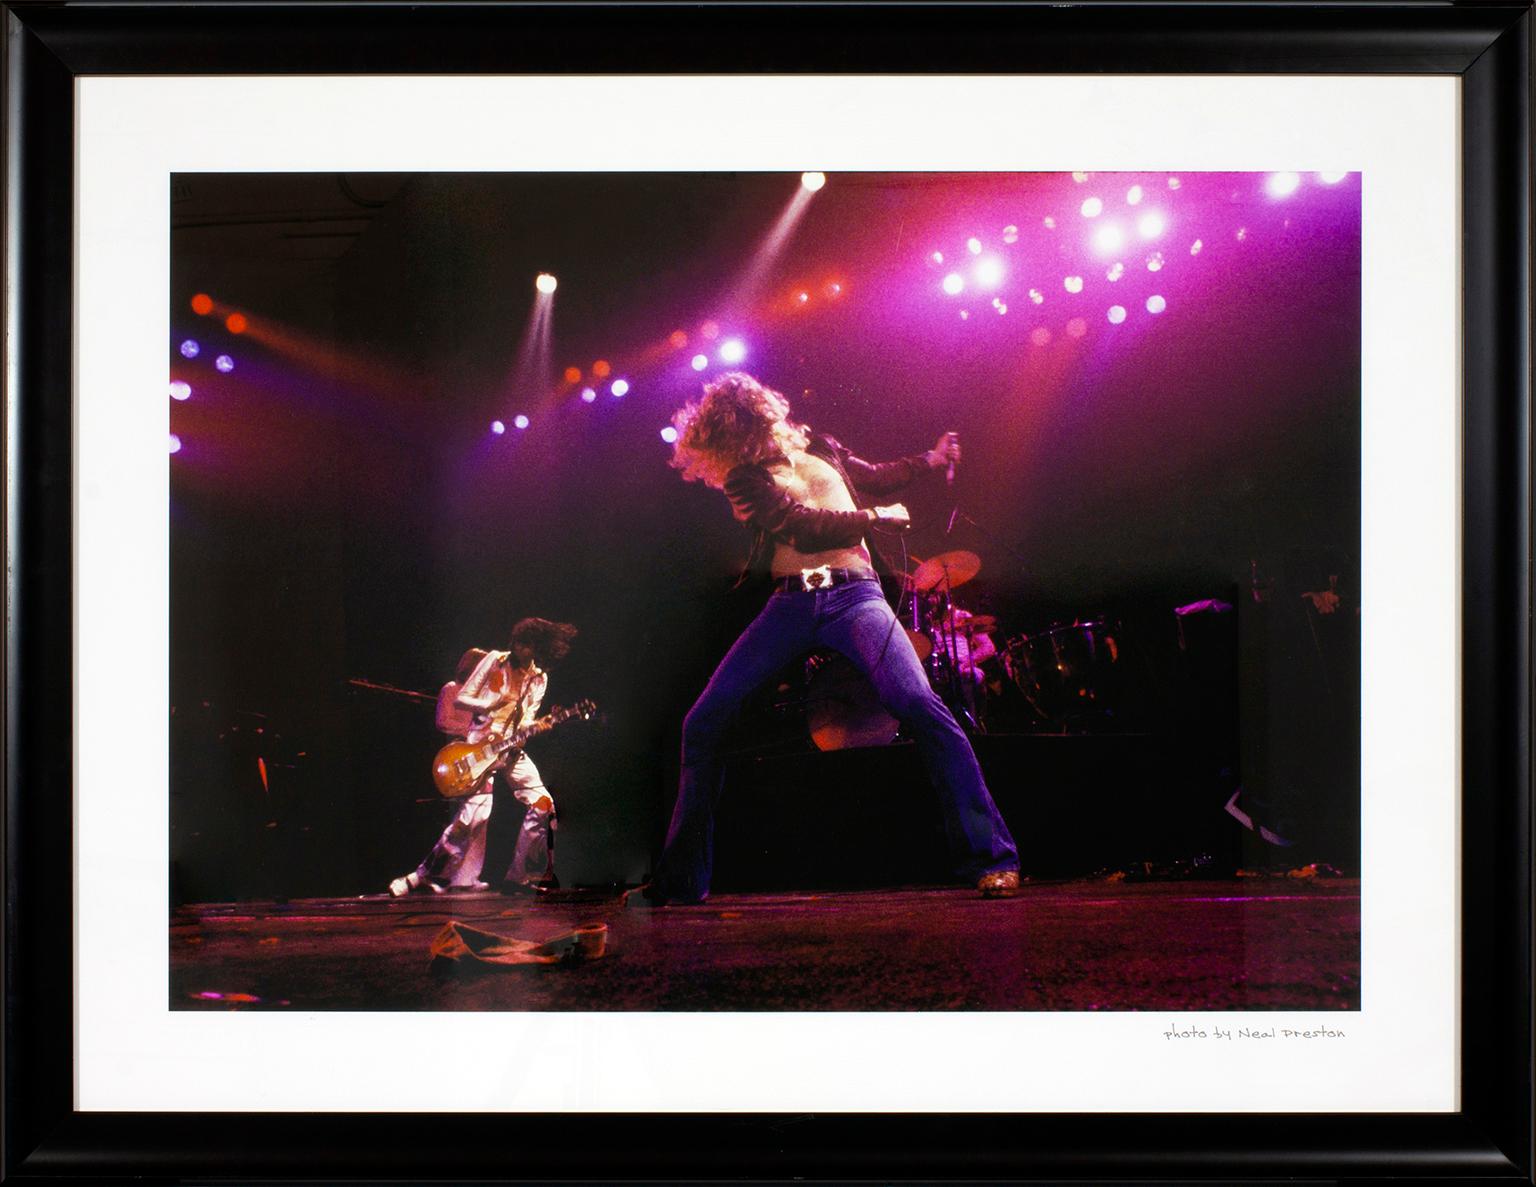 "Led Zeppelin" photograph by Neal Preston. Photo by Neal Preston hand written in lower right corner. This framed photo previously hung in a guest room at the Hard Rock Hotel & Casino in Las Vegas, Nevada, and comes with a certificate of authenticity